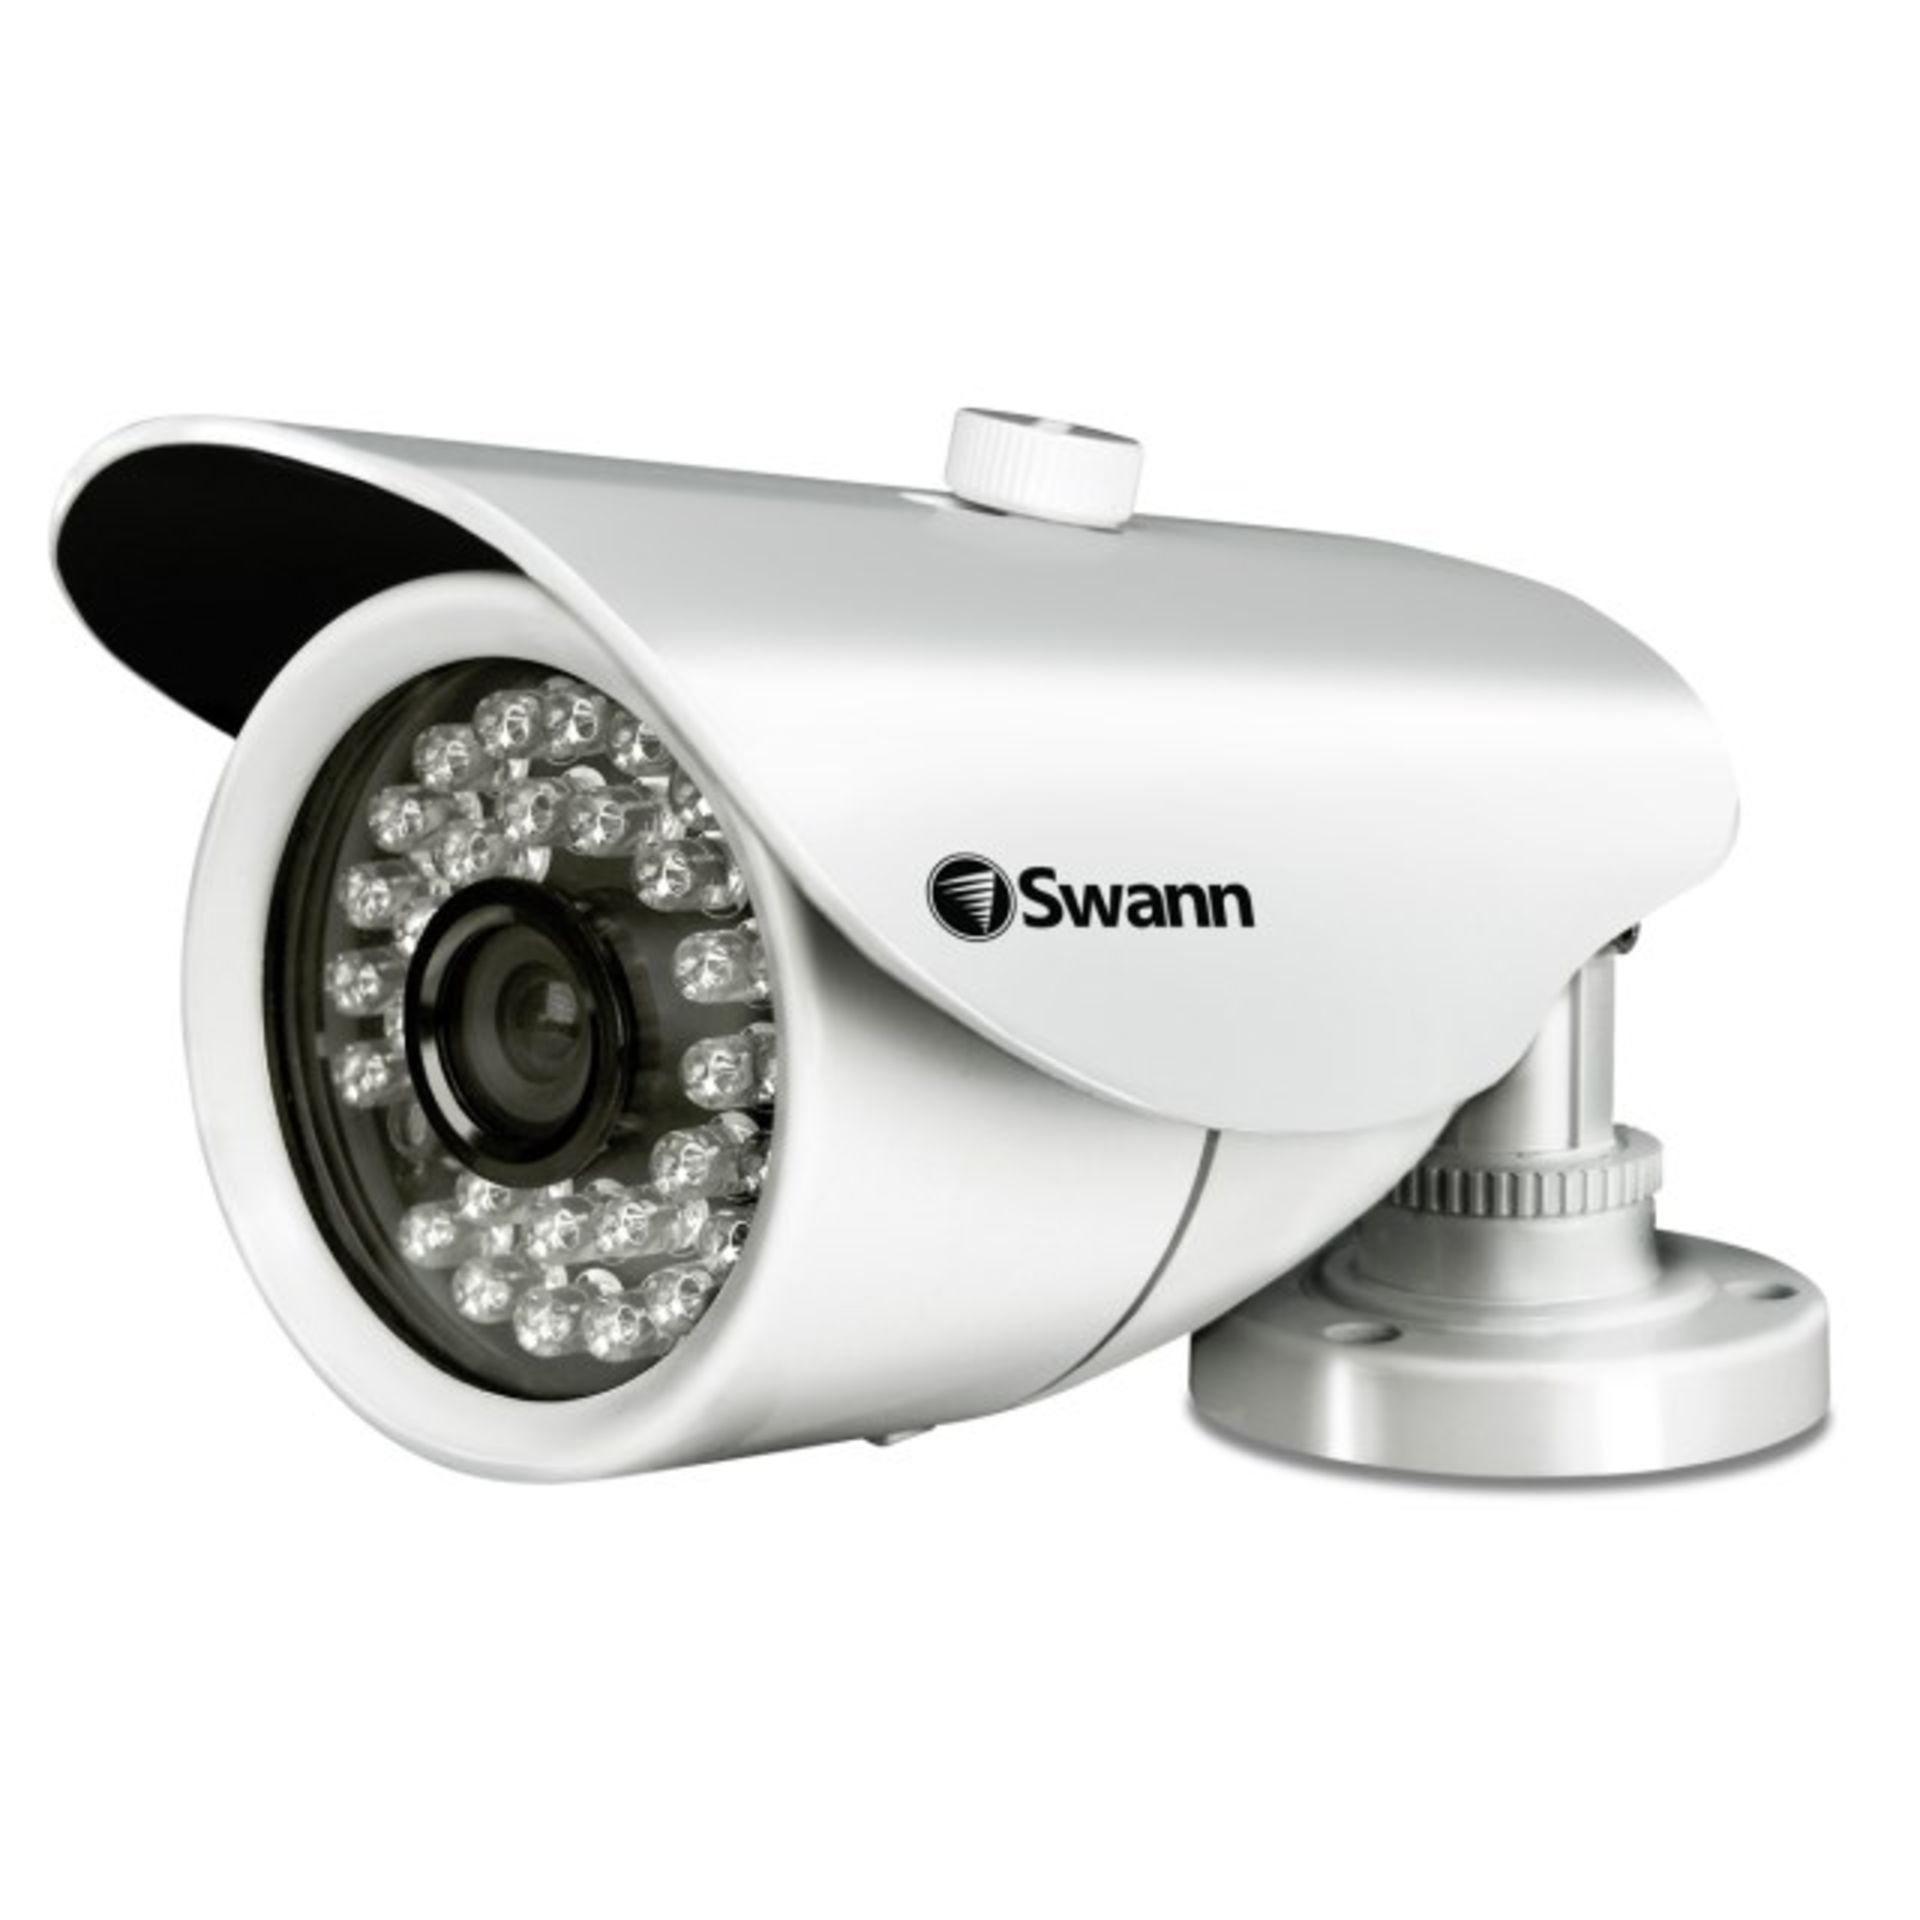 V Grade B Swann SW-770 Professional Security Camera With Night Vision 115ft - Weather Proof - 700